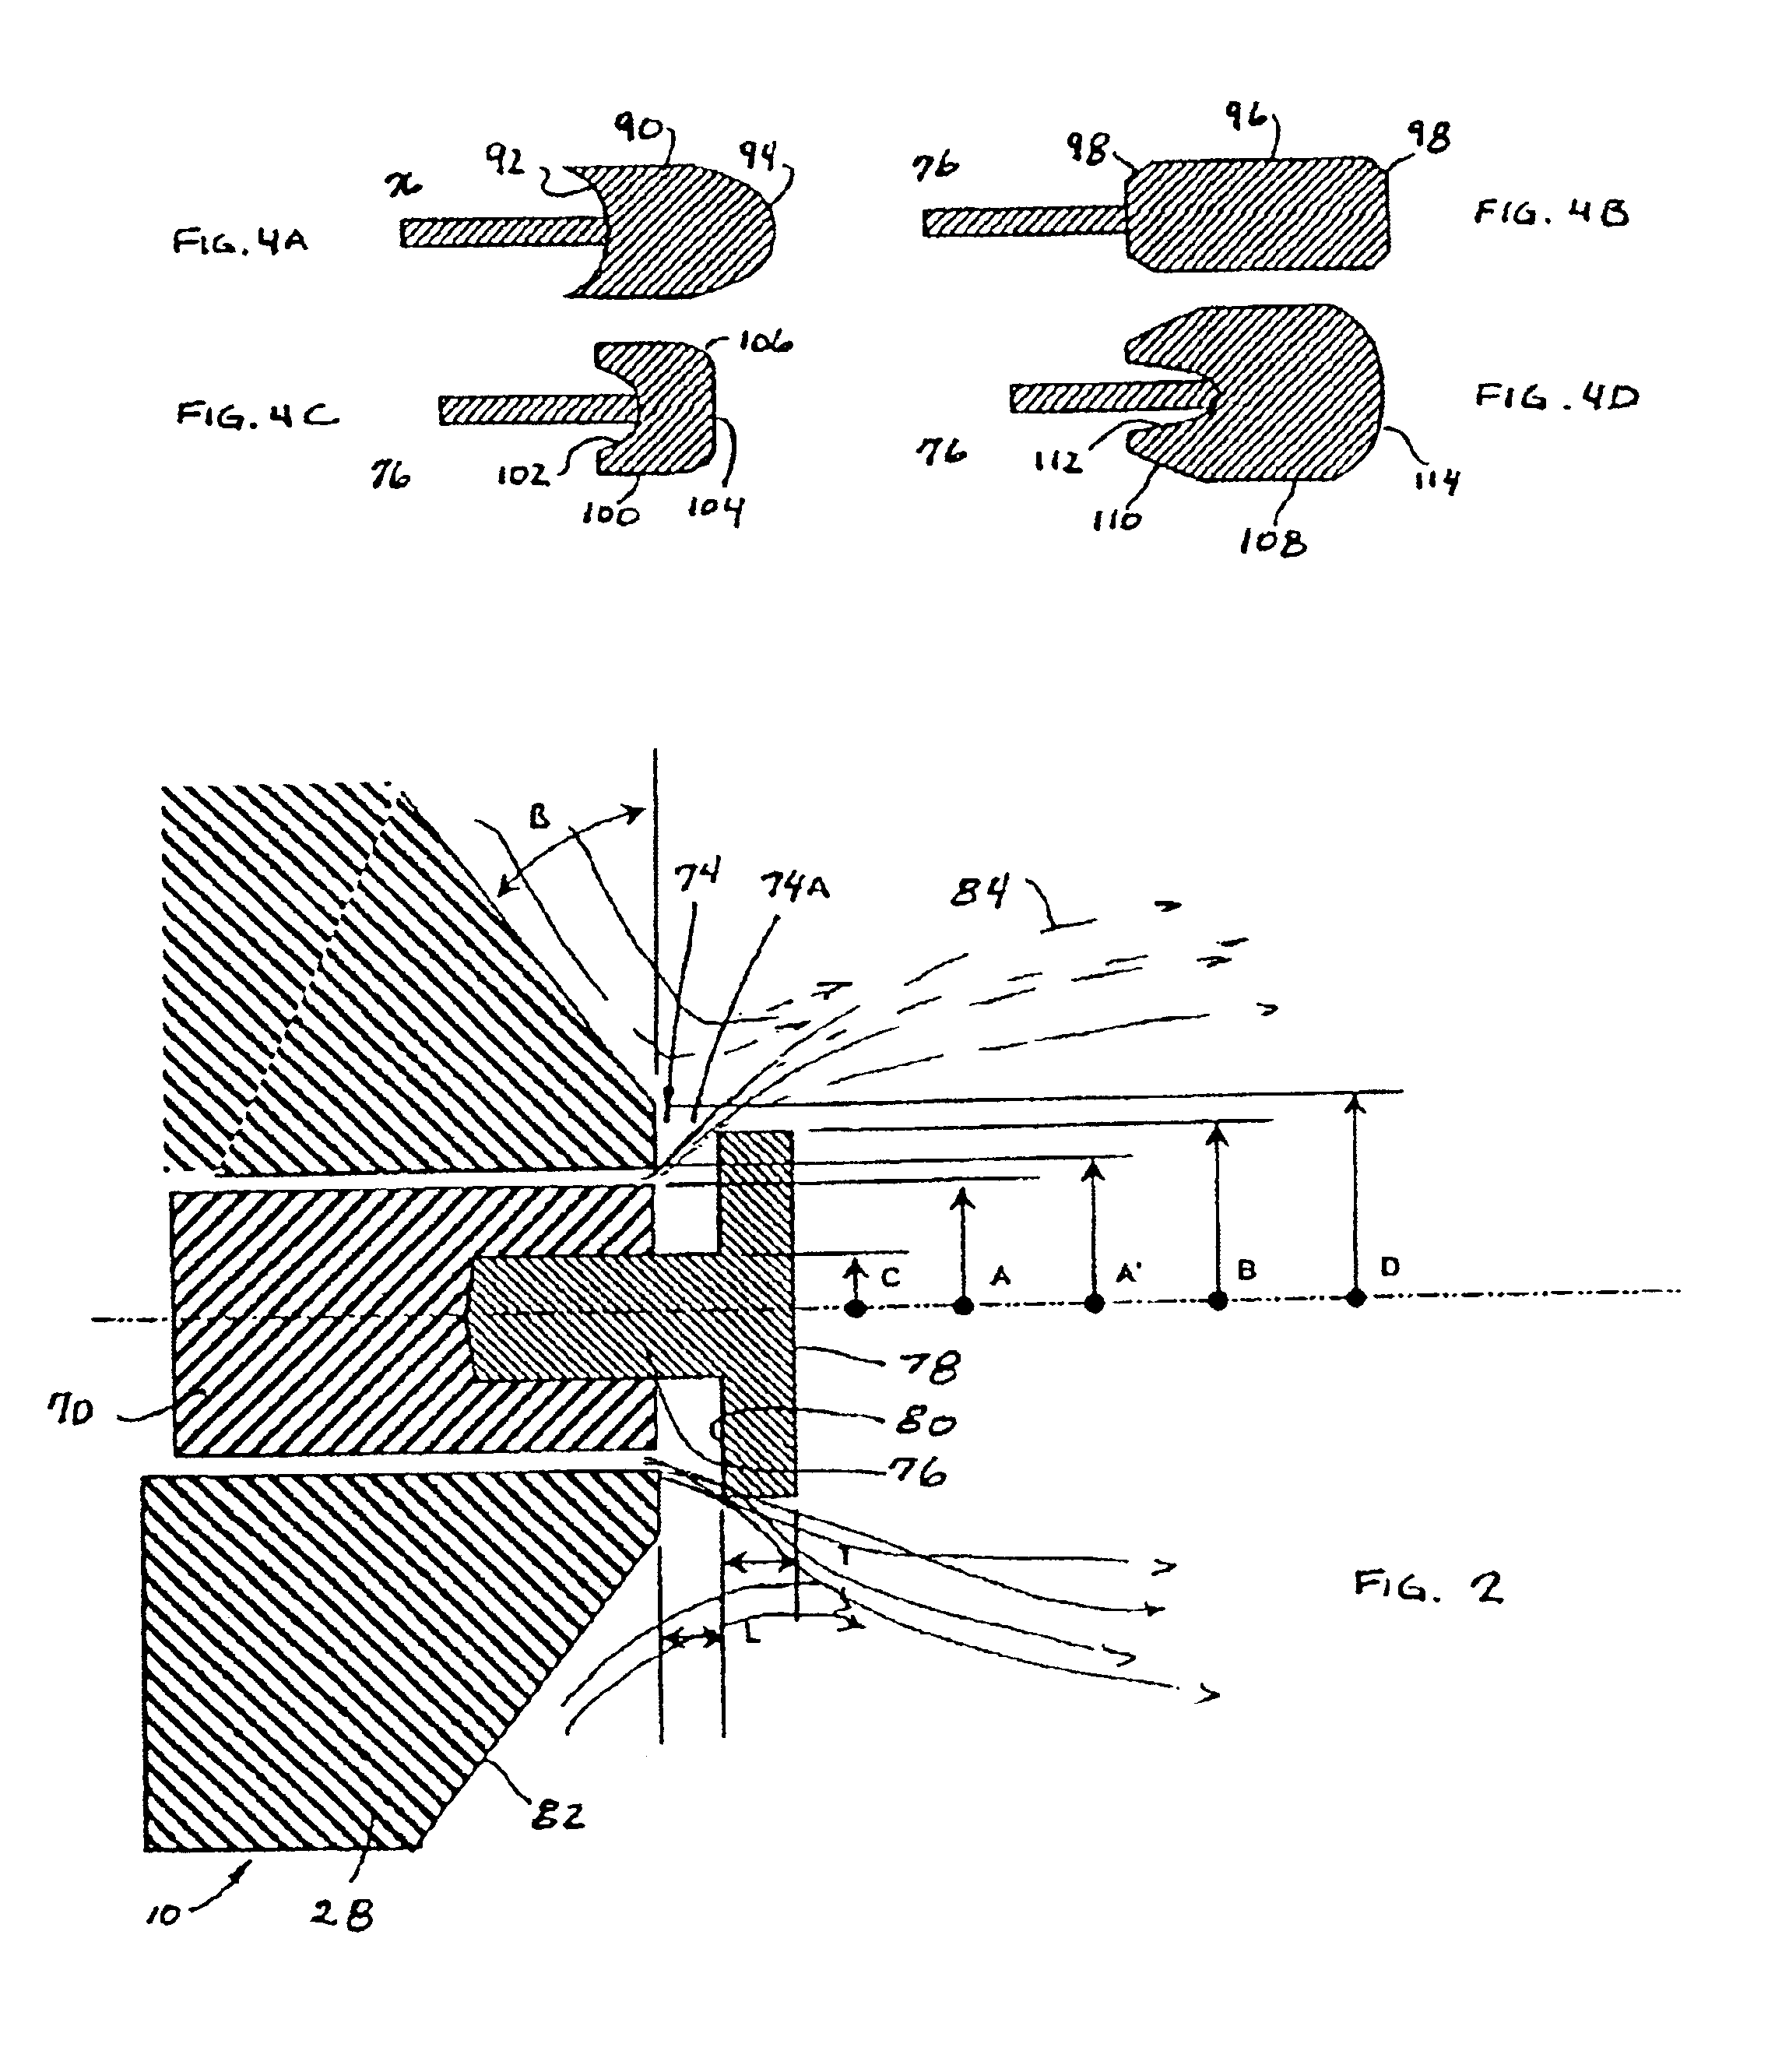 Atomizing nozzle for fine spray and misting applications